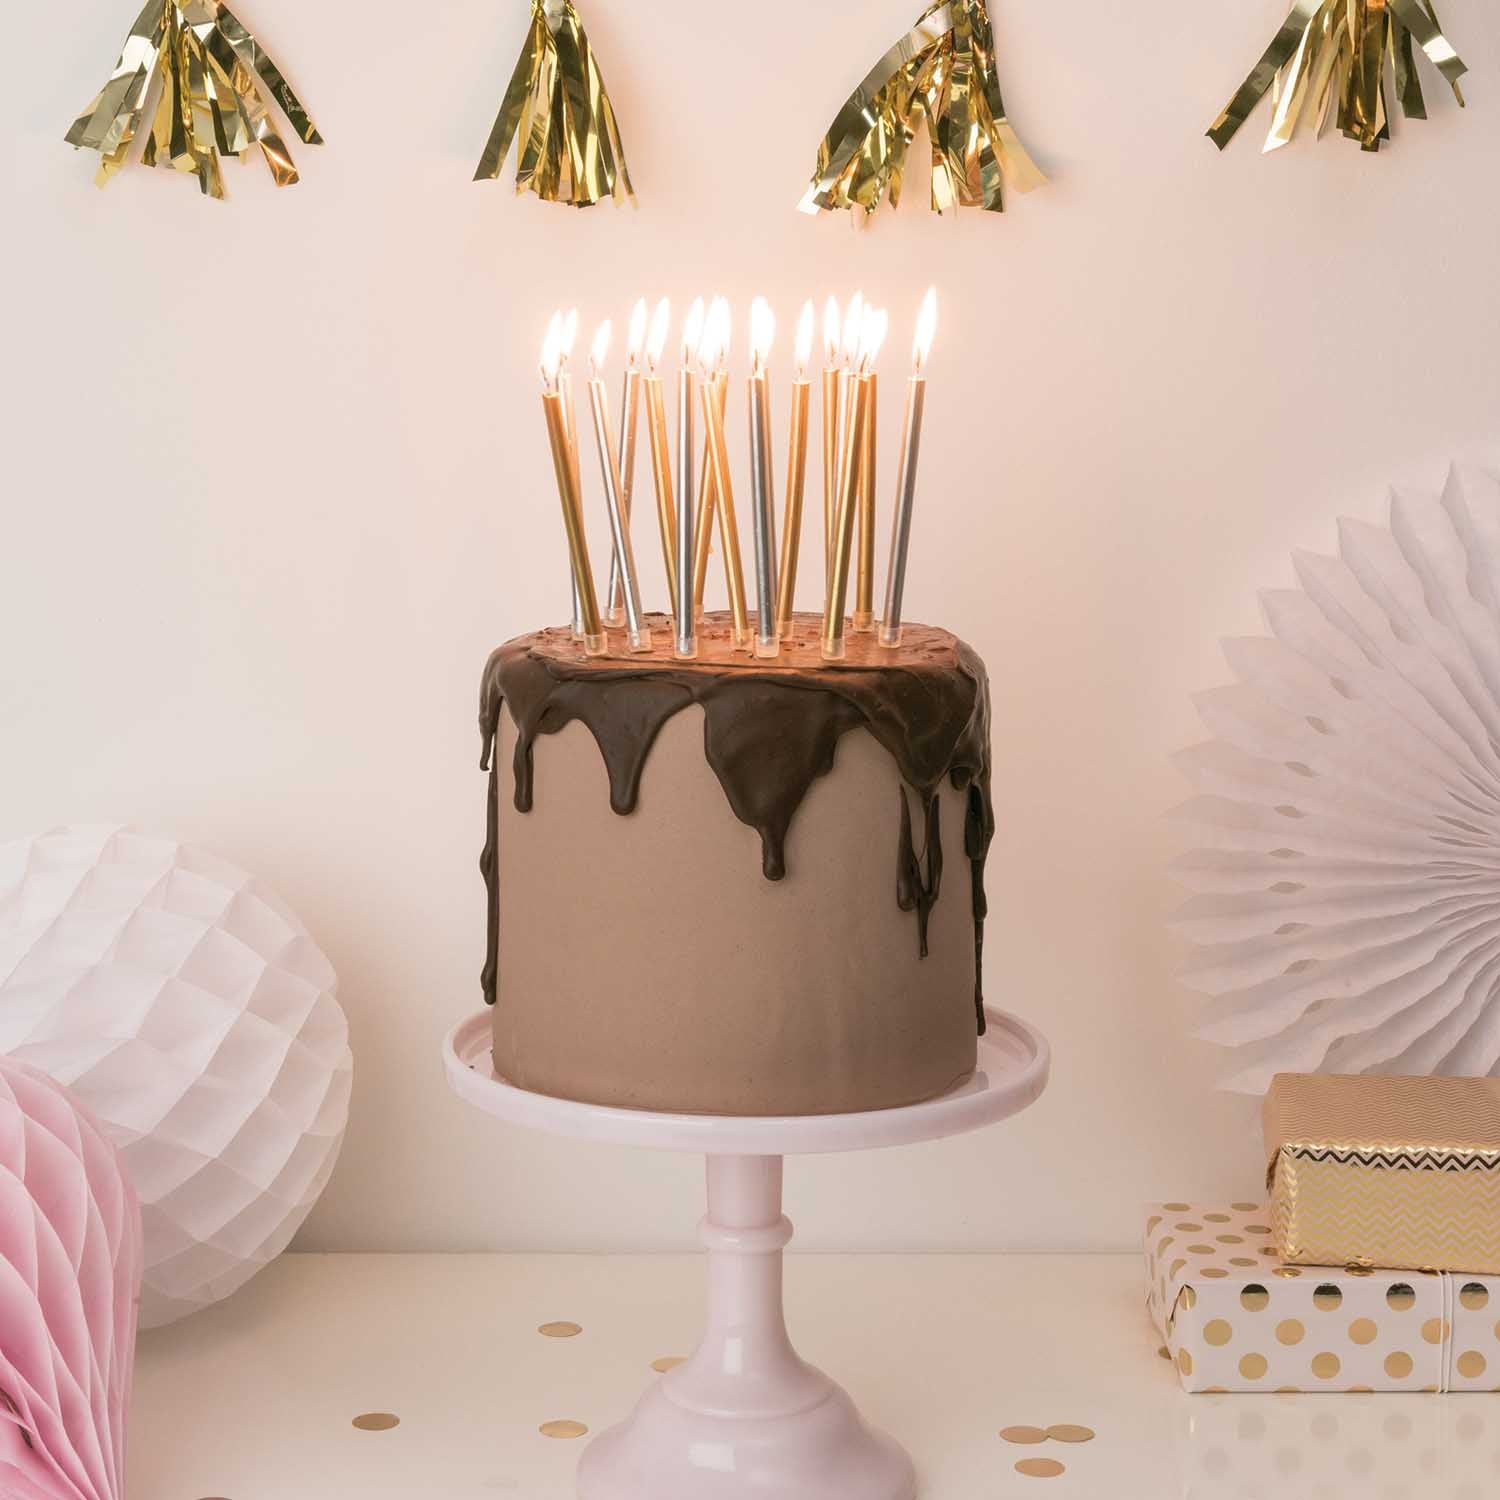 SHORT BIRTHDAY CANDLES | GOLD & SILVER MIX